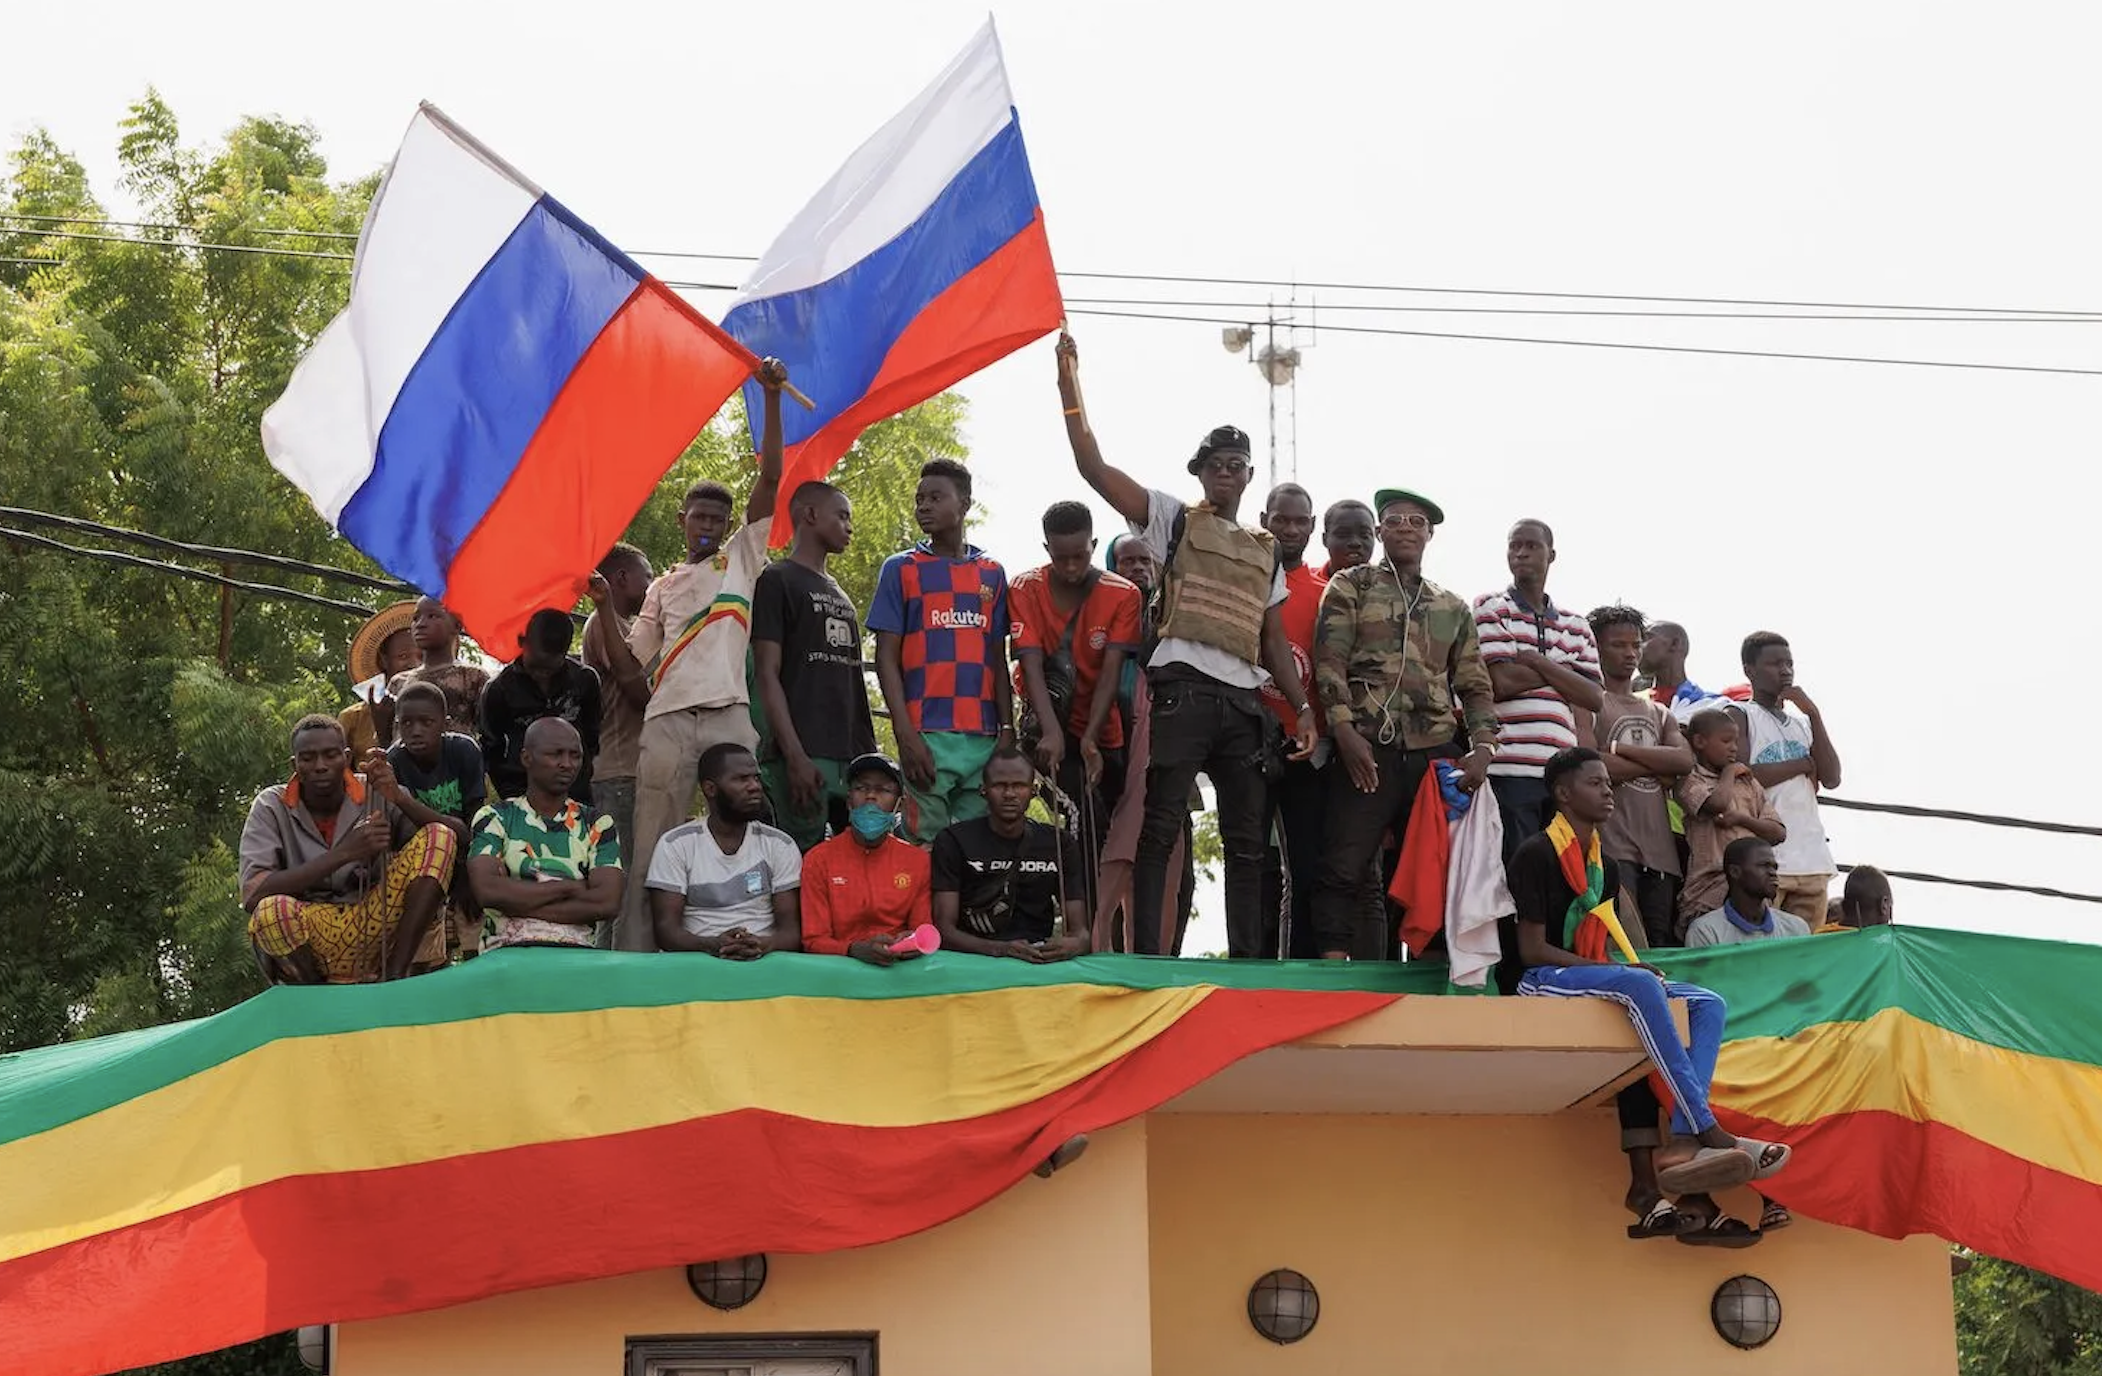 Supporters of Malian Interim President wave Russian flags during a pro-Junta and pro-Russia rally in Bamako.